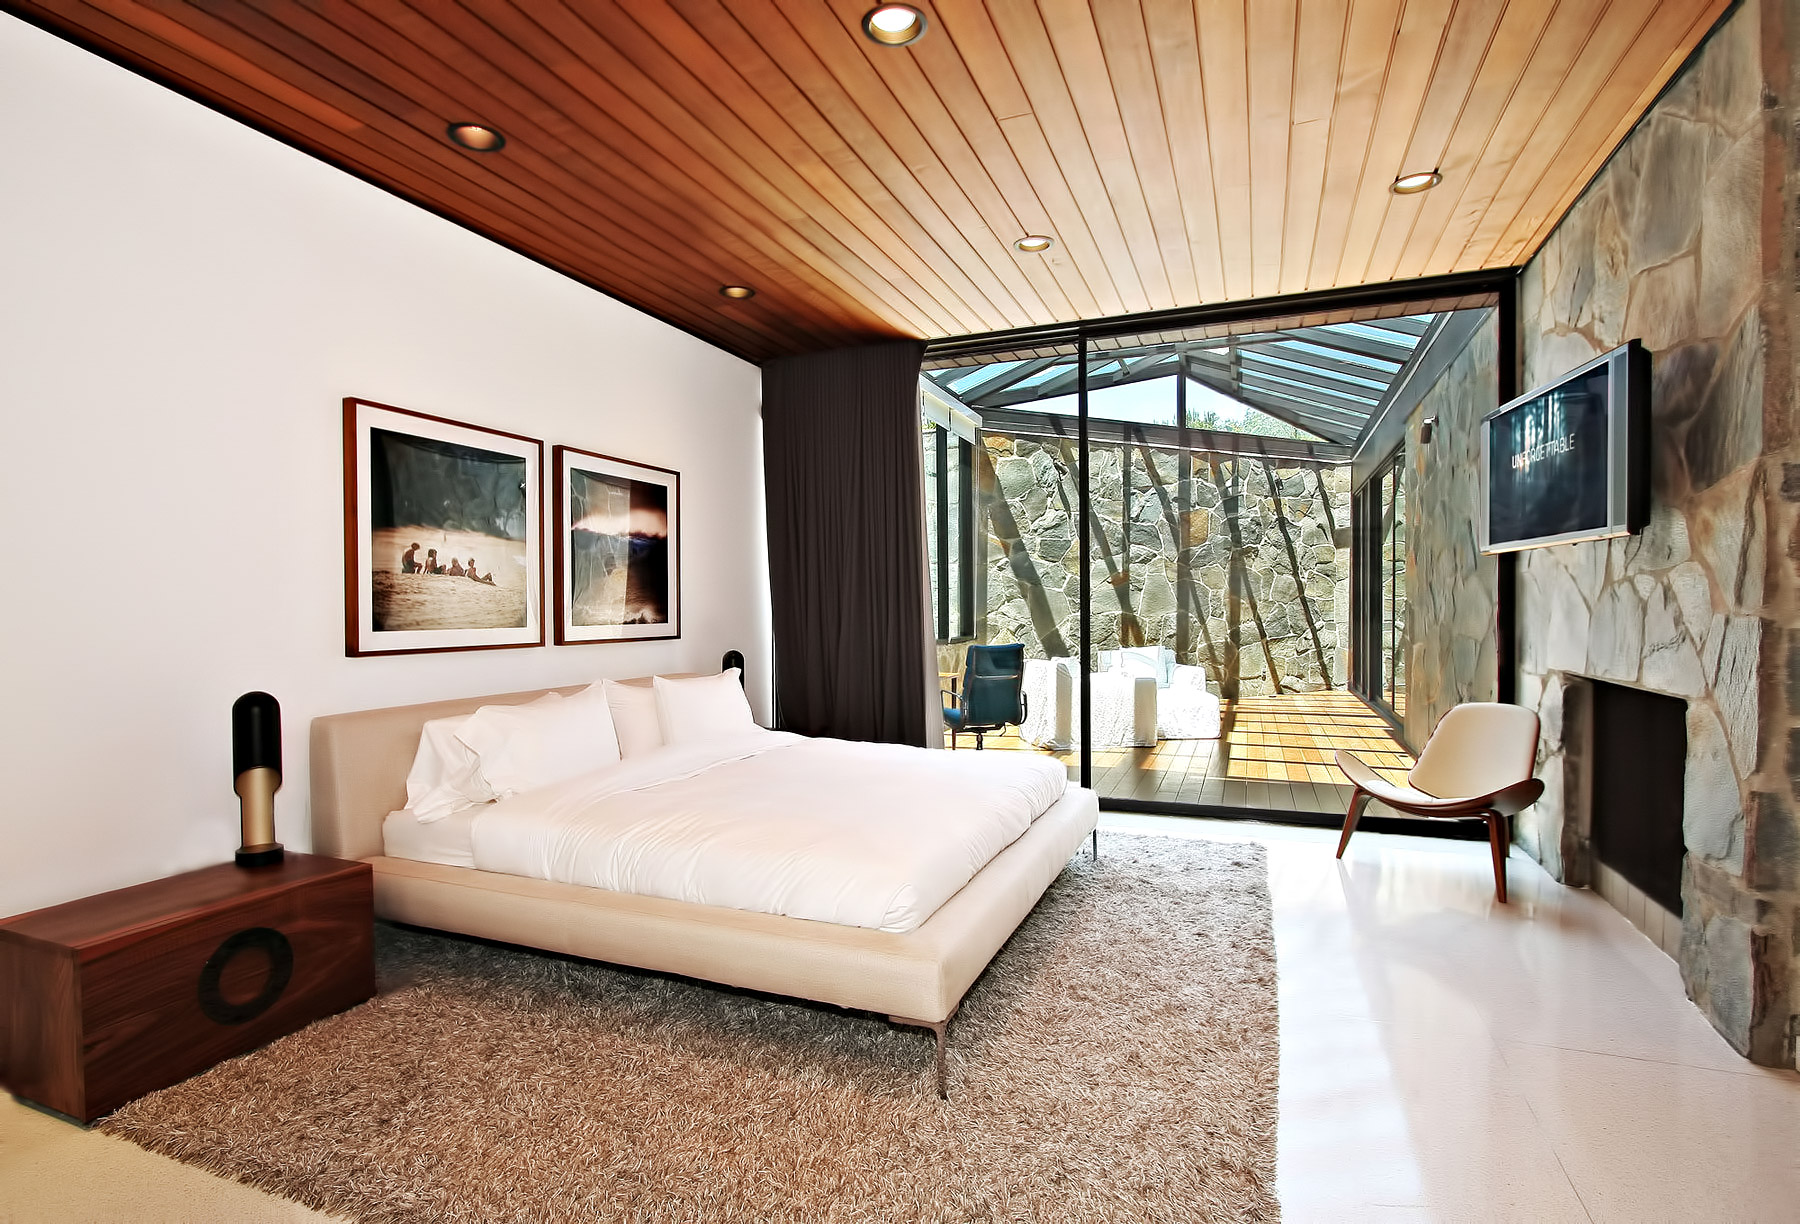 Bedroom with Wood, Stone, and Glass Design – Trousdale Estates Luxury Home – 630 Clifton Pl, Beverly Hills, CA, USA